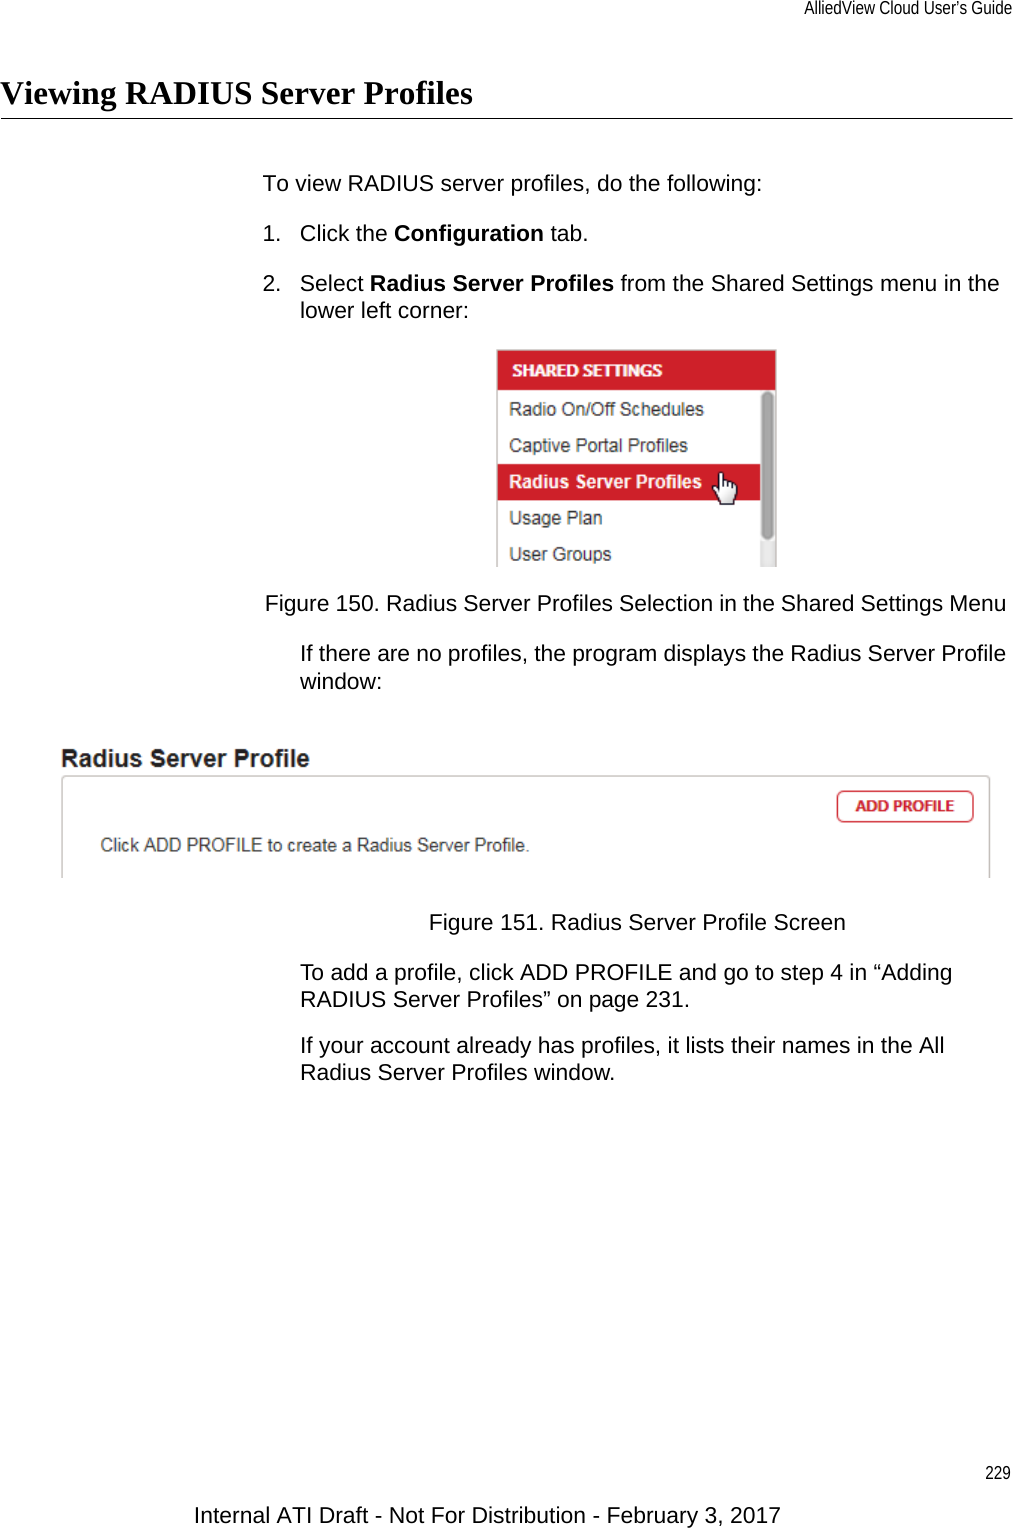 AlliedView Cloud User’s Guide229Viewing RADIUS Server ProfilesTo view RADIUS server profiles, do the following:1. Click the Configuration tab.2. Select Radius Server Profiles from the Shared Settings menu in the lower left corner:Figure 150. Radius Server Profiles Selection in the Shared Settings Menu If there are no profiles, the program displays the Radius Server Profile window:Figure 151. Radius Server Profile ScreenTo add a profile, click ADD PROFILE and go to step 4 in “Adding RADIUS Server Profiles” on page 231.If your account already has profiles, it lists their names in the All Radius Server Profiles window.Internal ATI Draft - Not For Distribution - February 3, 2017